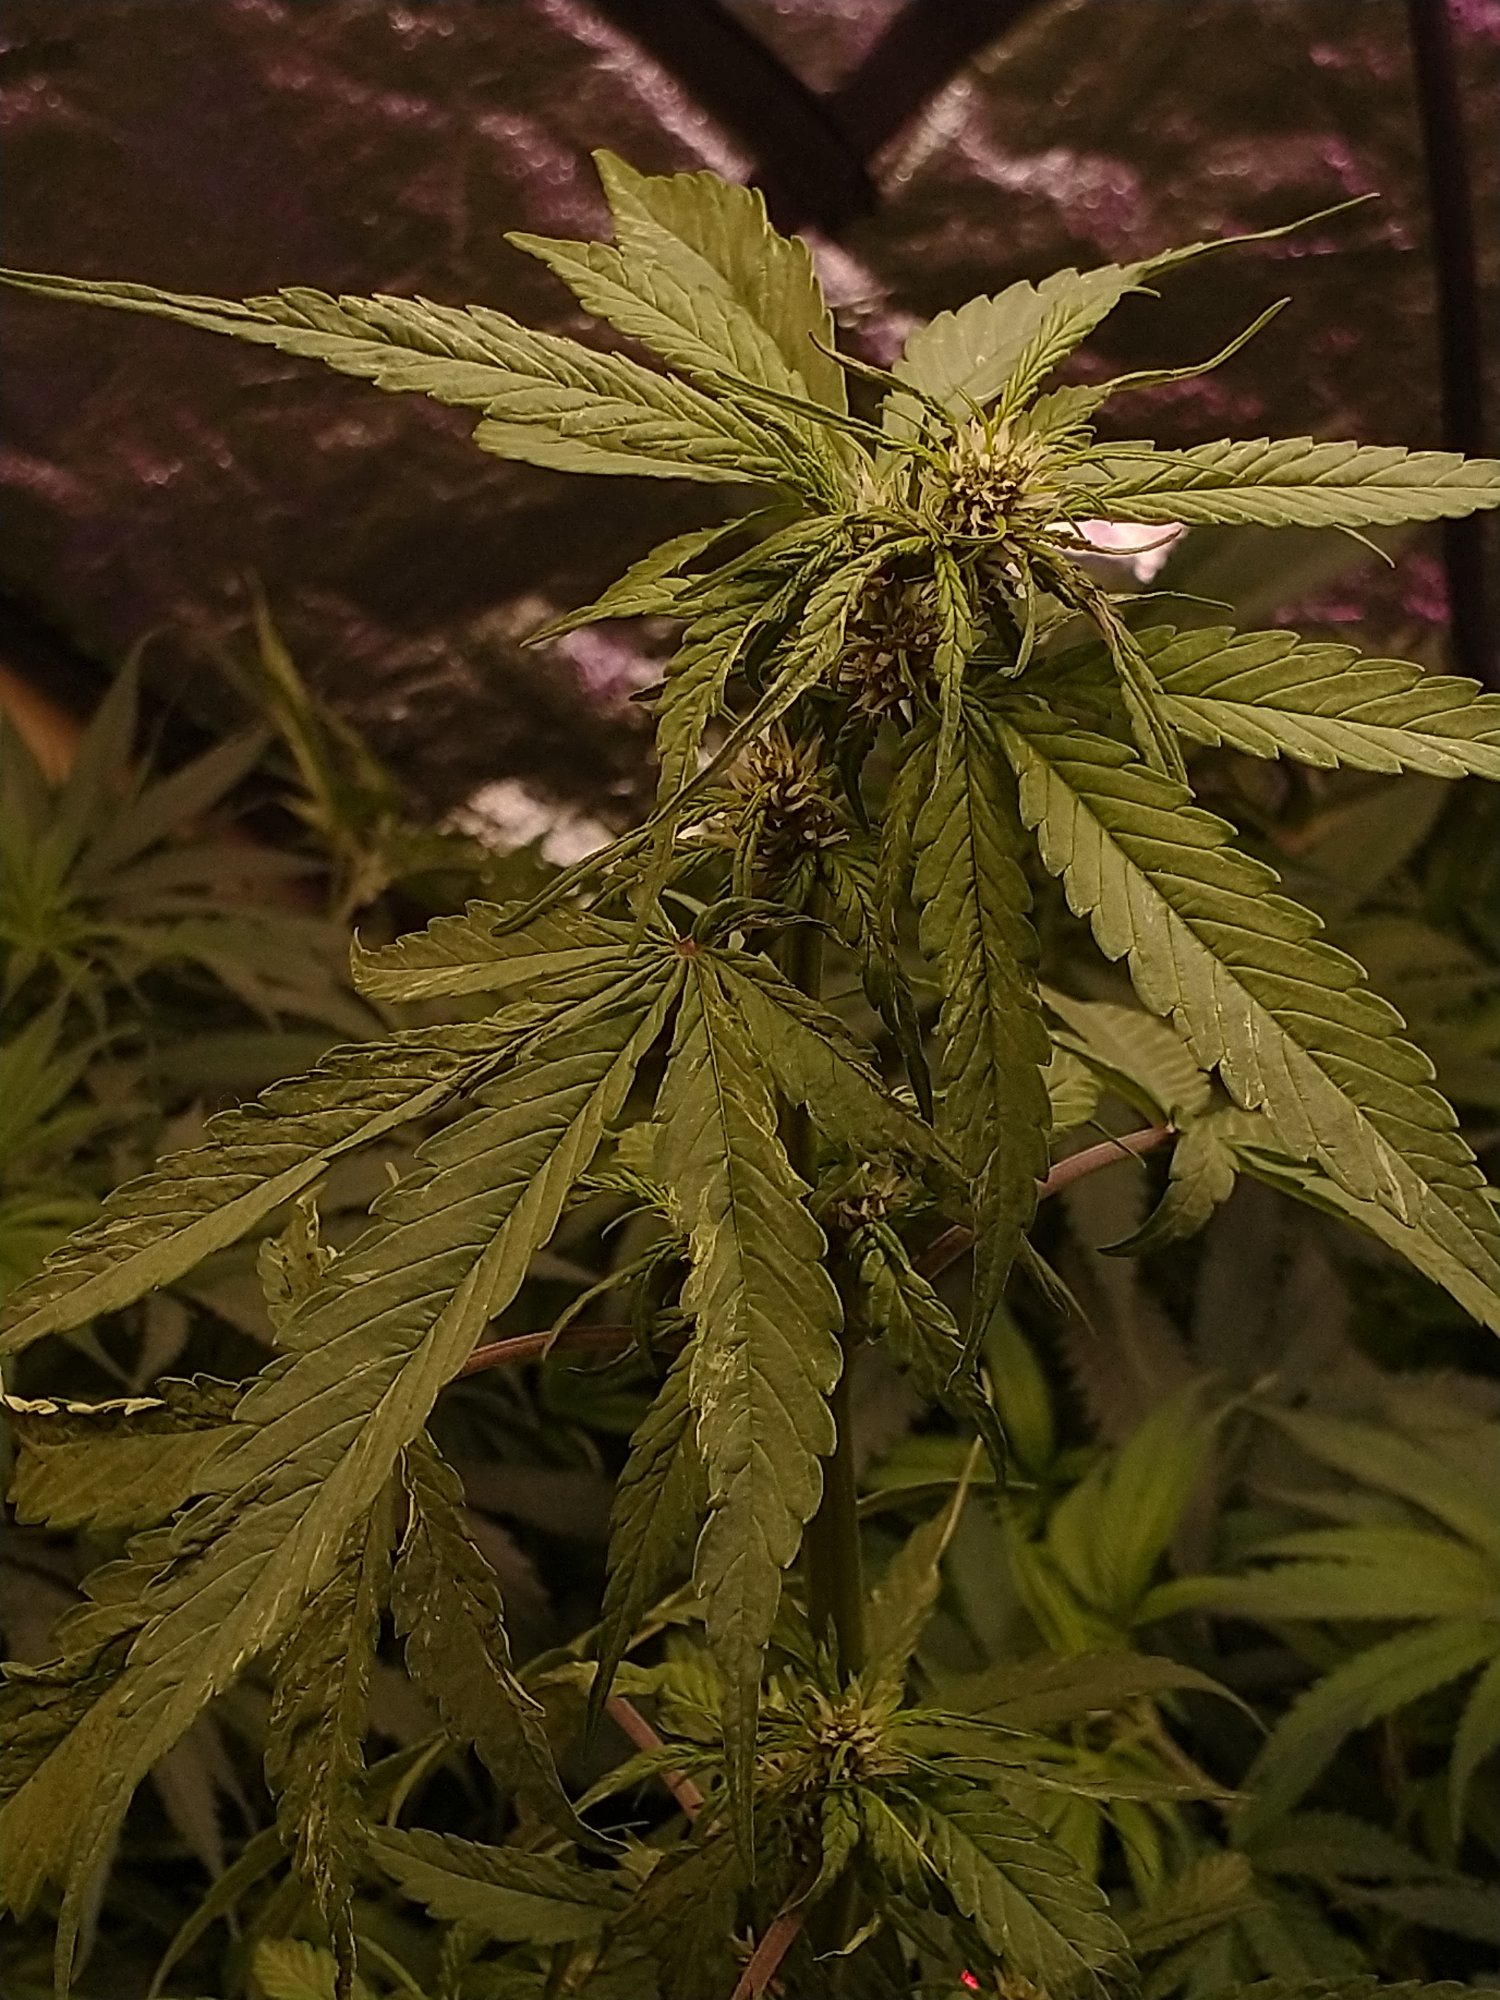 Whats wrong with these leaves 4